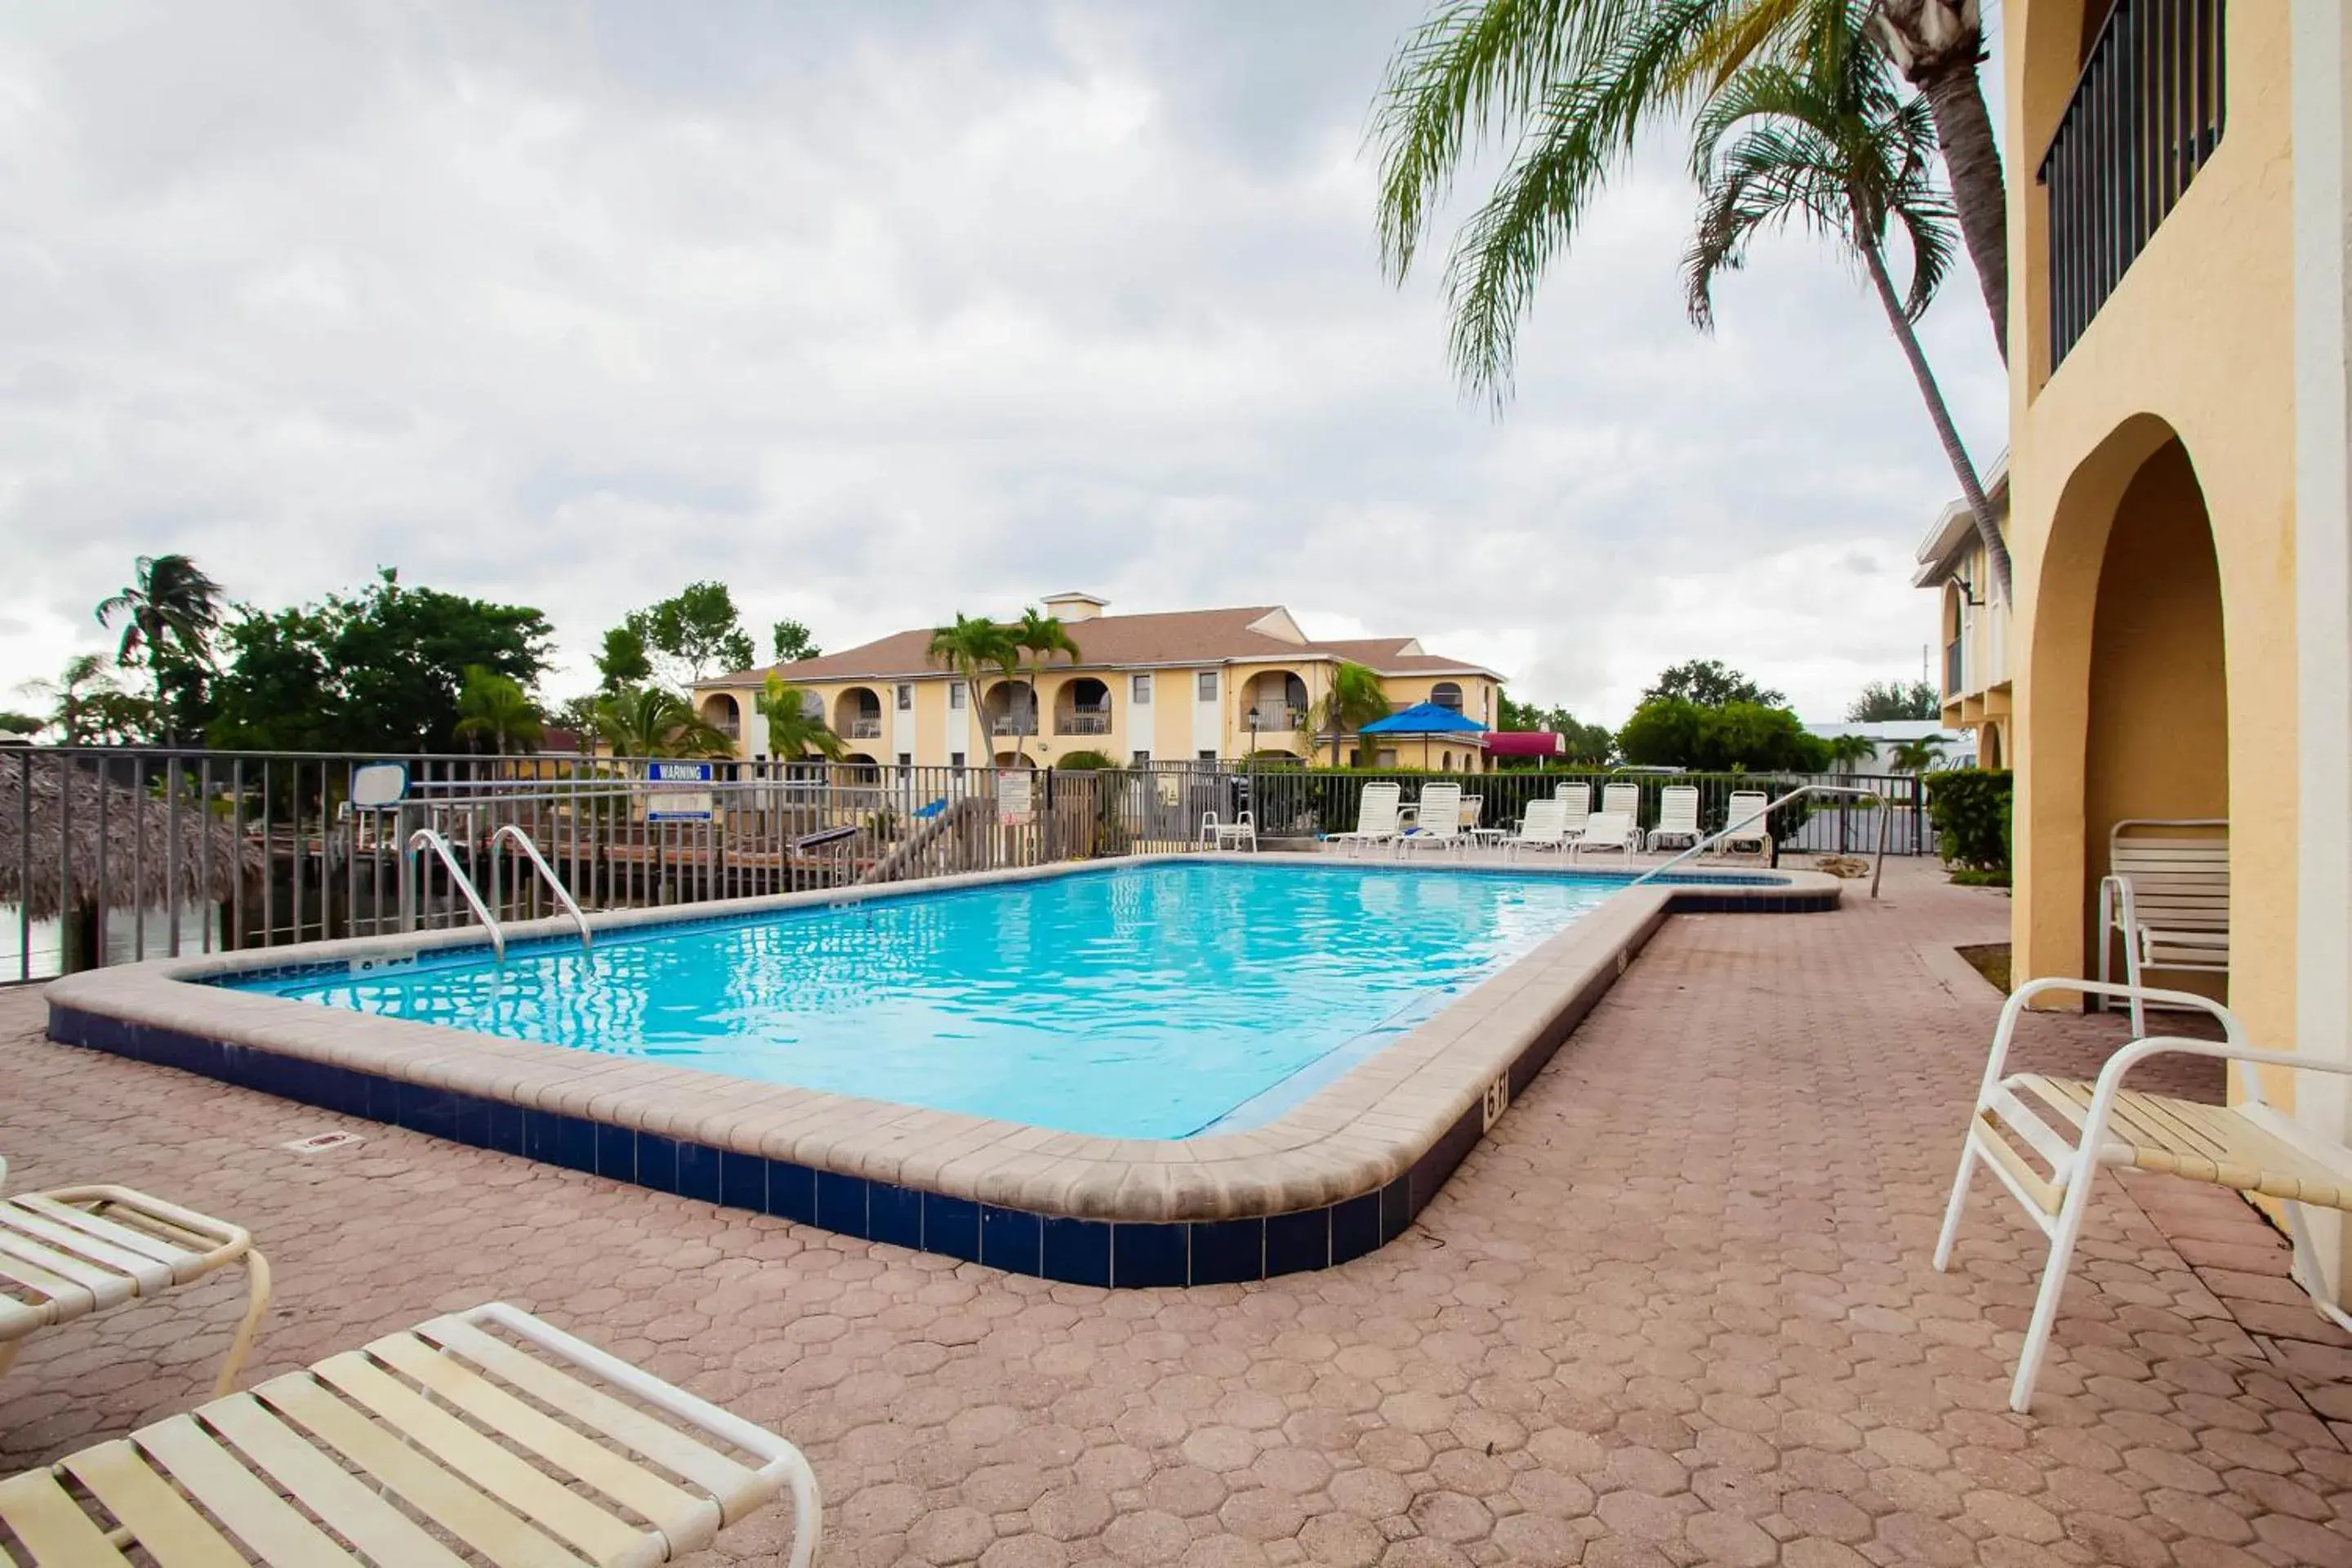 Swimming Pool in OYO Waterfront Hotel- Cape Coral Fort Myers, FL